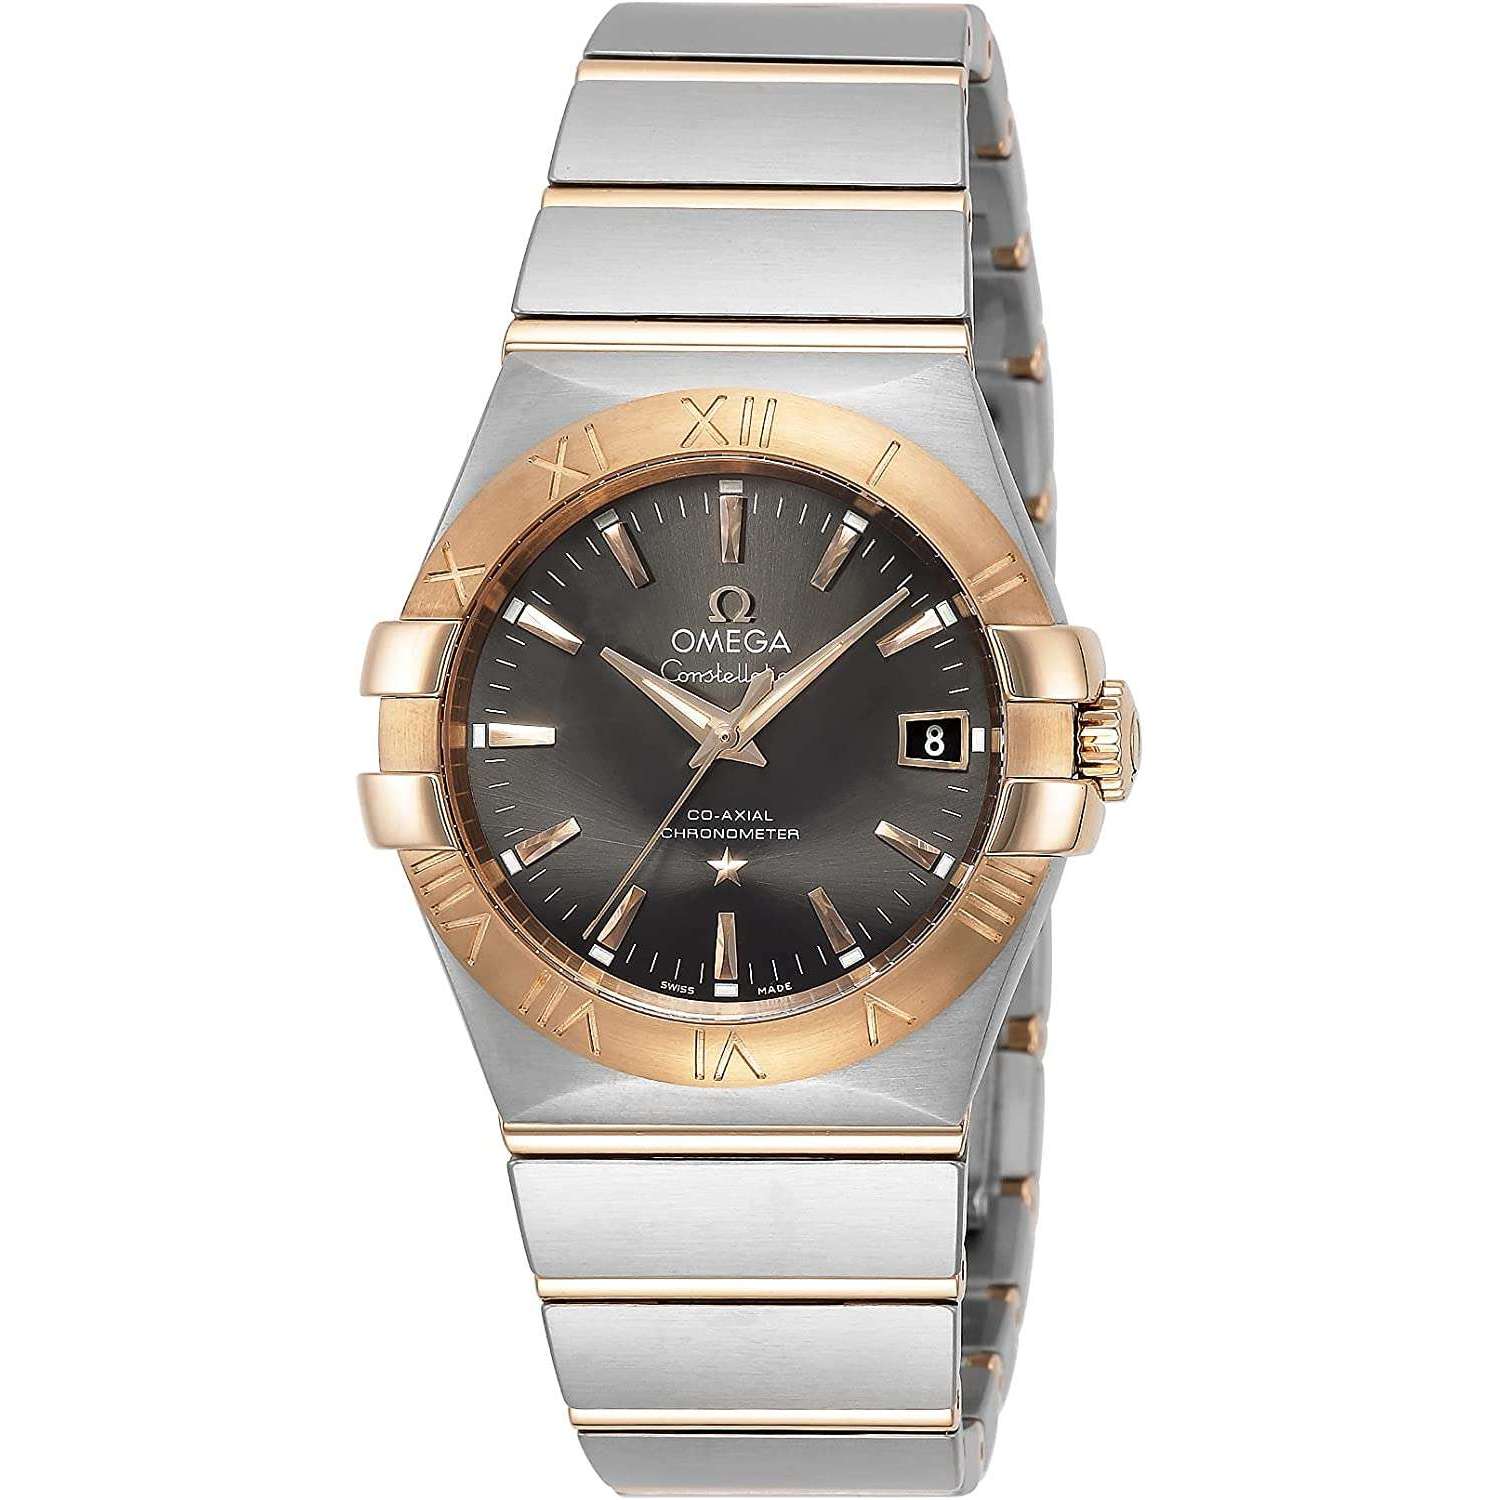 ROOK JAPAN:OMEGA CONSTELLATION CO-AXIAL CHRONOMETER 34 MM MEN WATCH 123.20.35.20.06.002,Luxury Watch,Omega